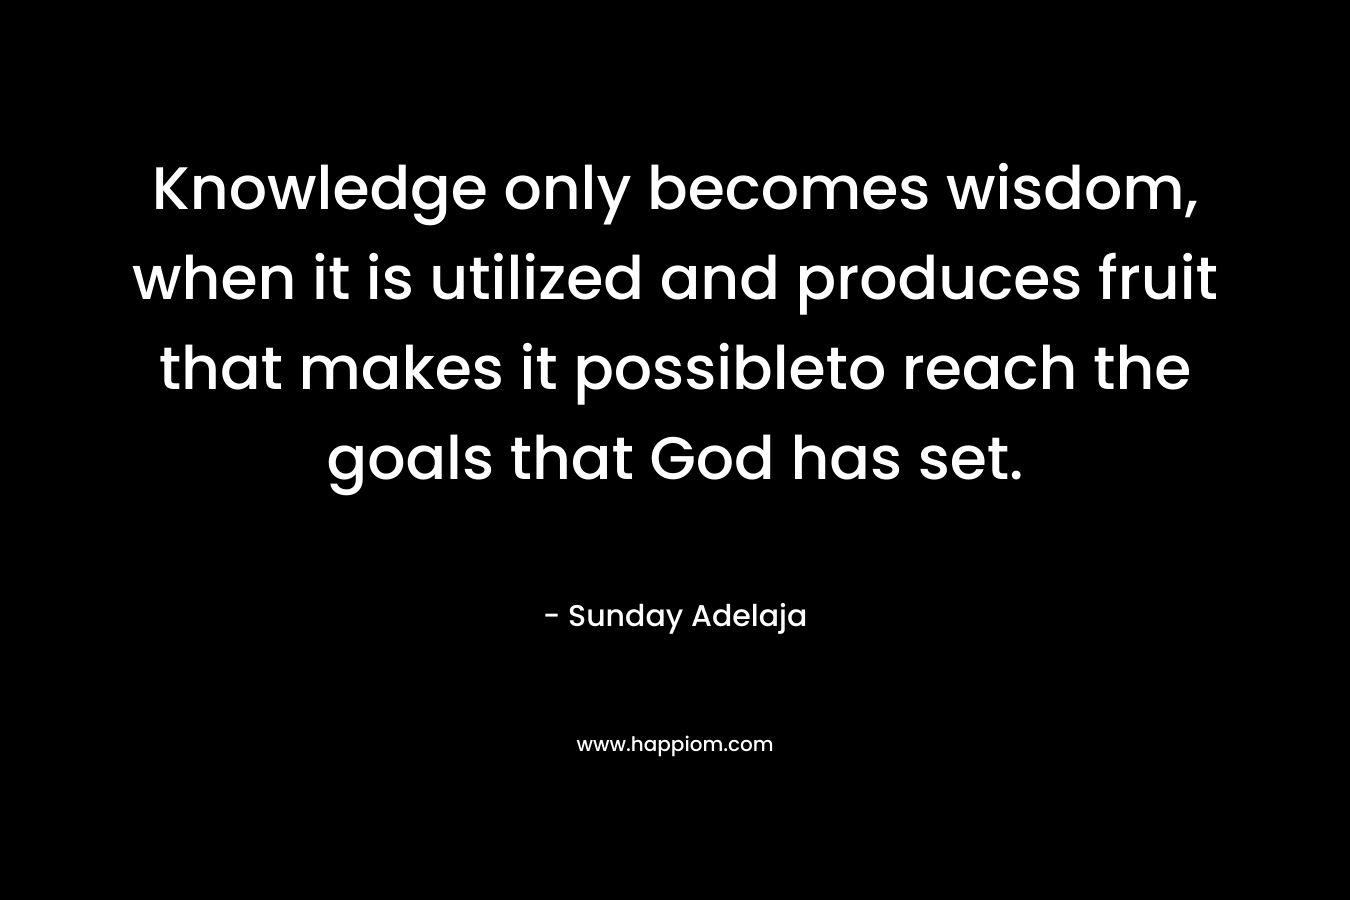 Knowledge only becomes wisdom, when it is utilized and produces fruit that makes it possibleto reach the goals that God has set.